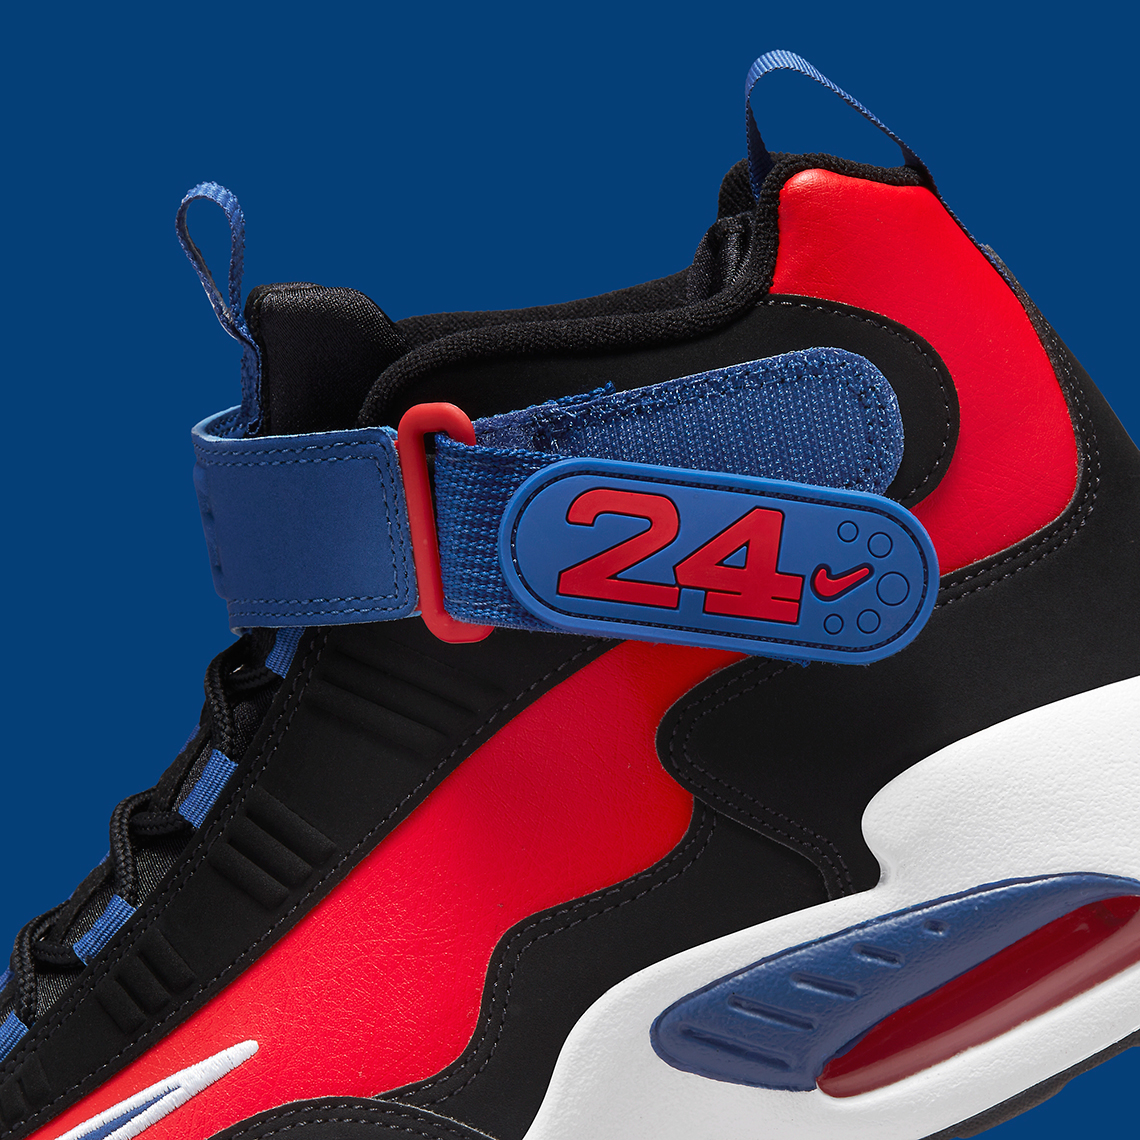 nike-air-griffey-max-1-navy-red-release-date-6.jpg